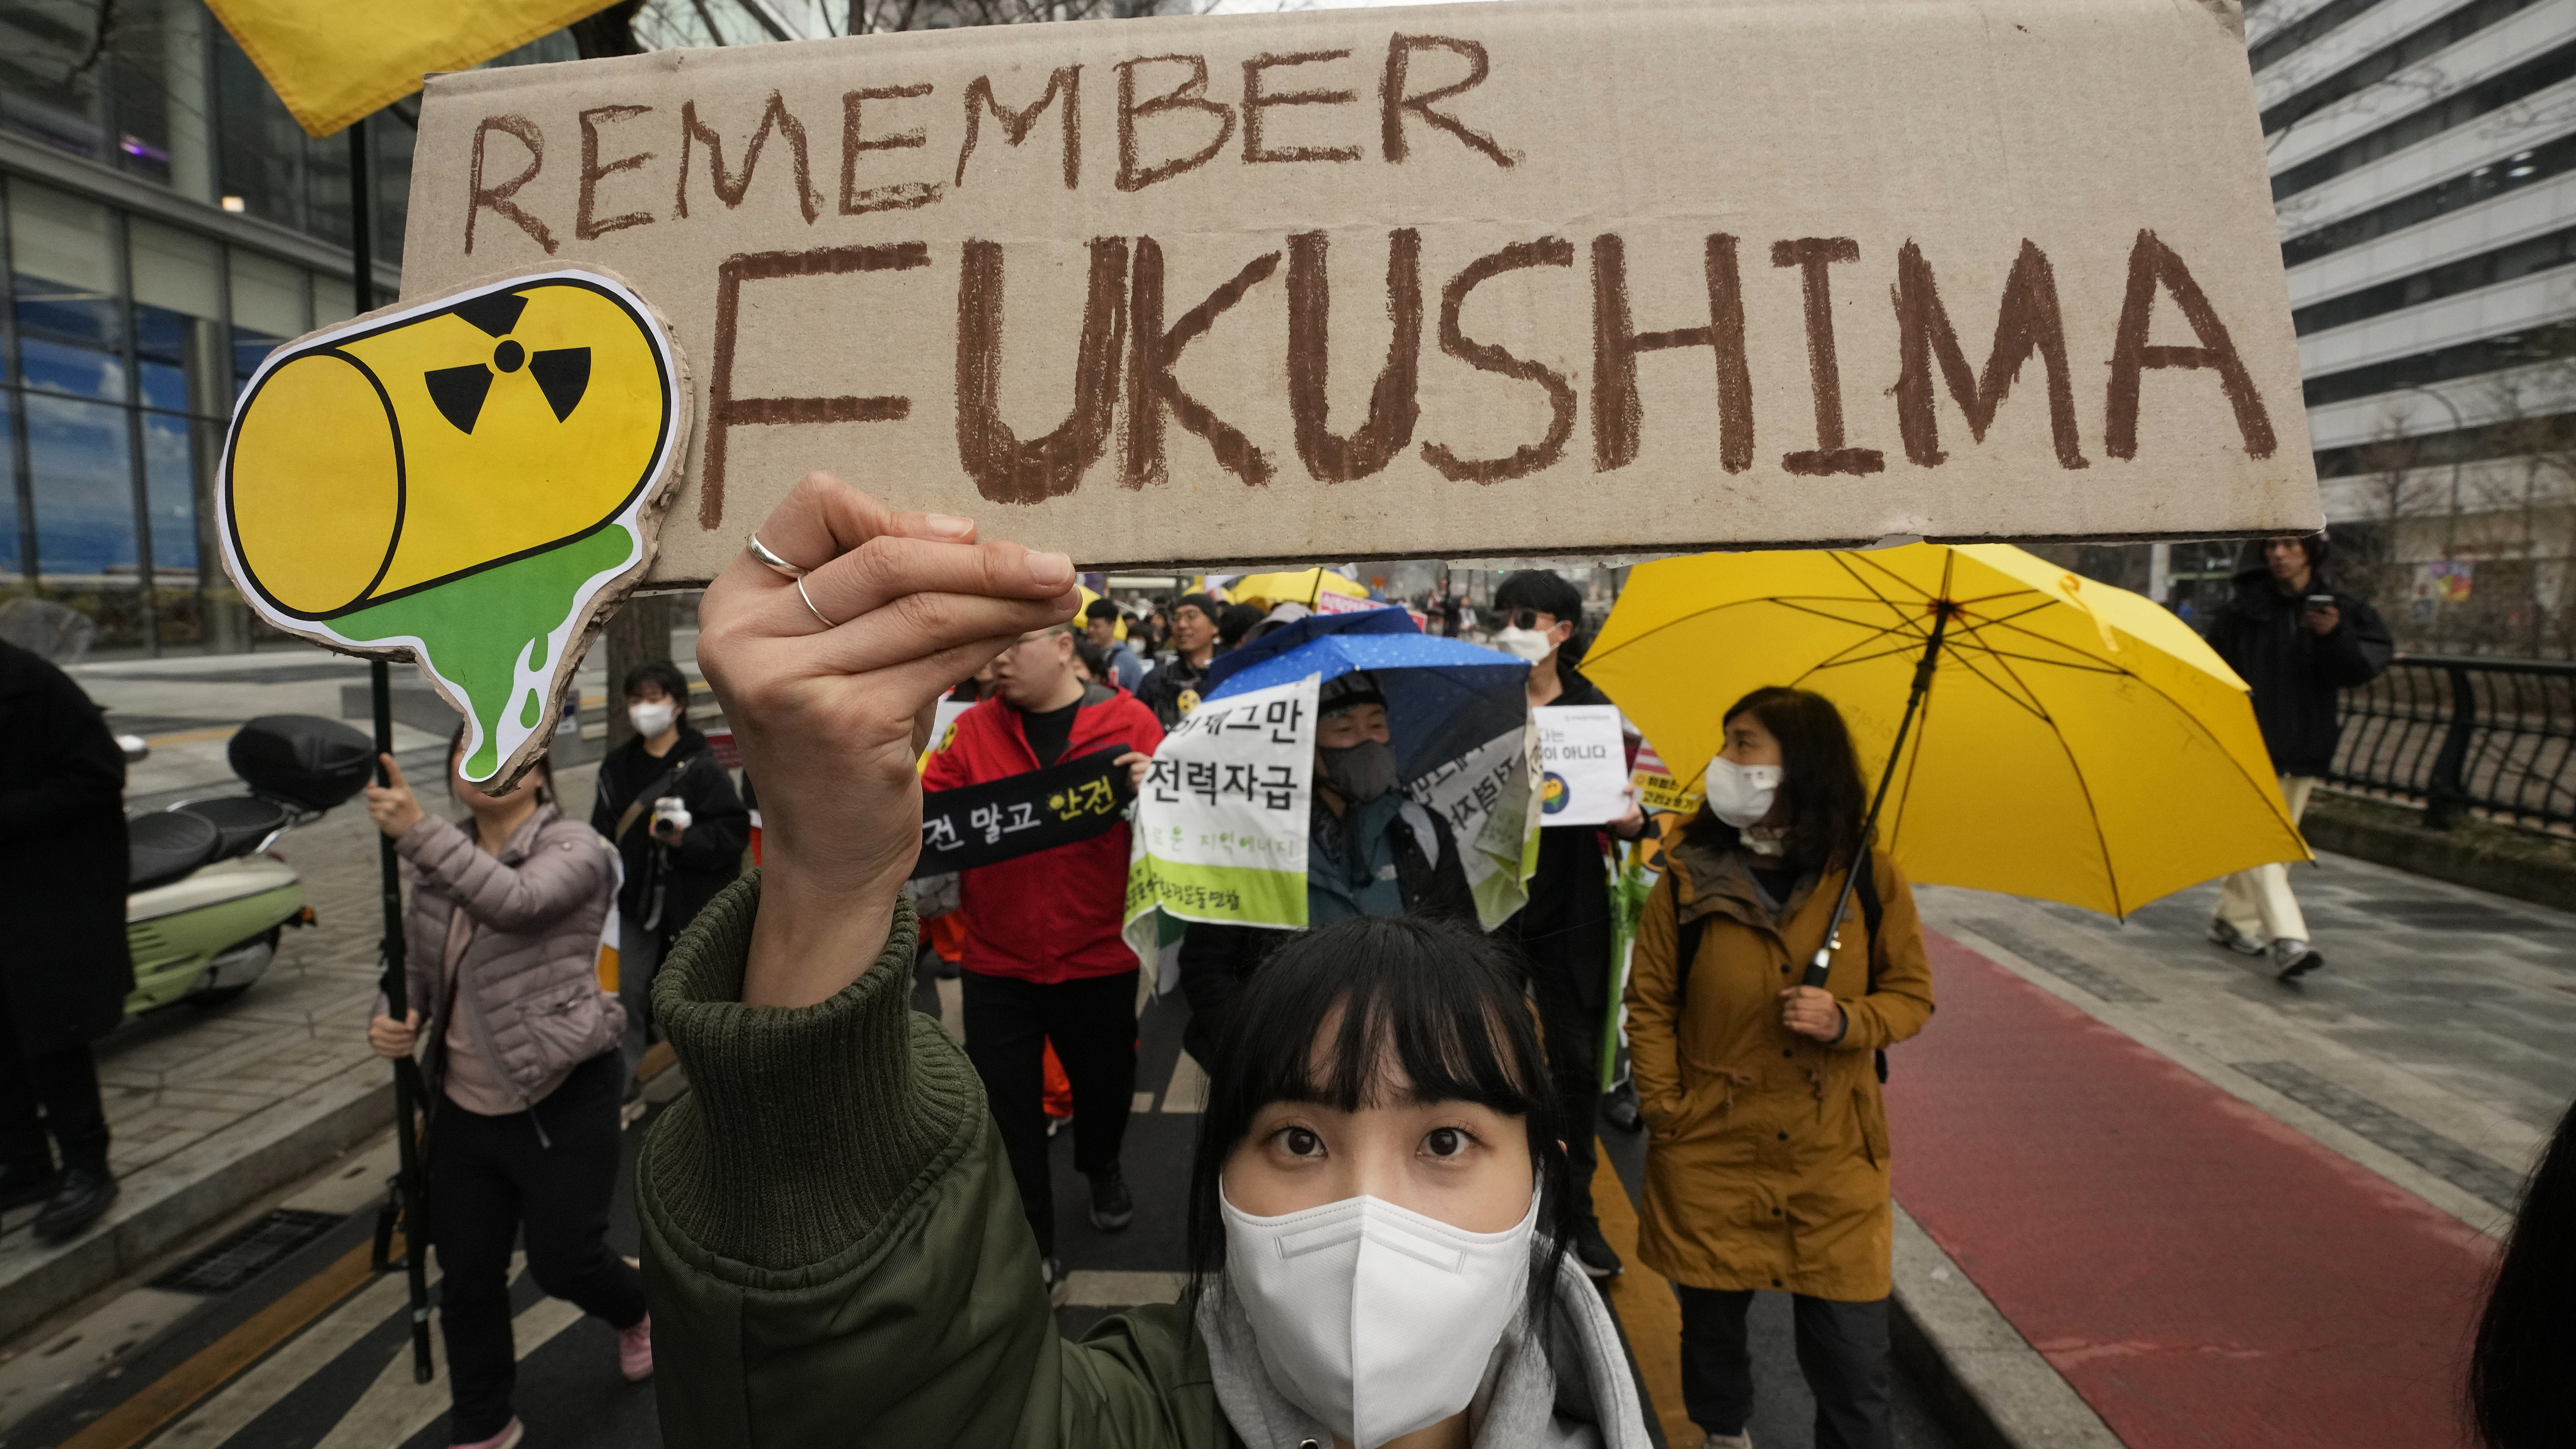 Environmental activists march during a rally marking the 12th anniversary of Fukushima nuclear disaster, in Seoul, South Korea, March 9, 2023. They denounce Japan's planned release of treated radioactive wastewater into the sea. /CFP